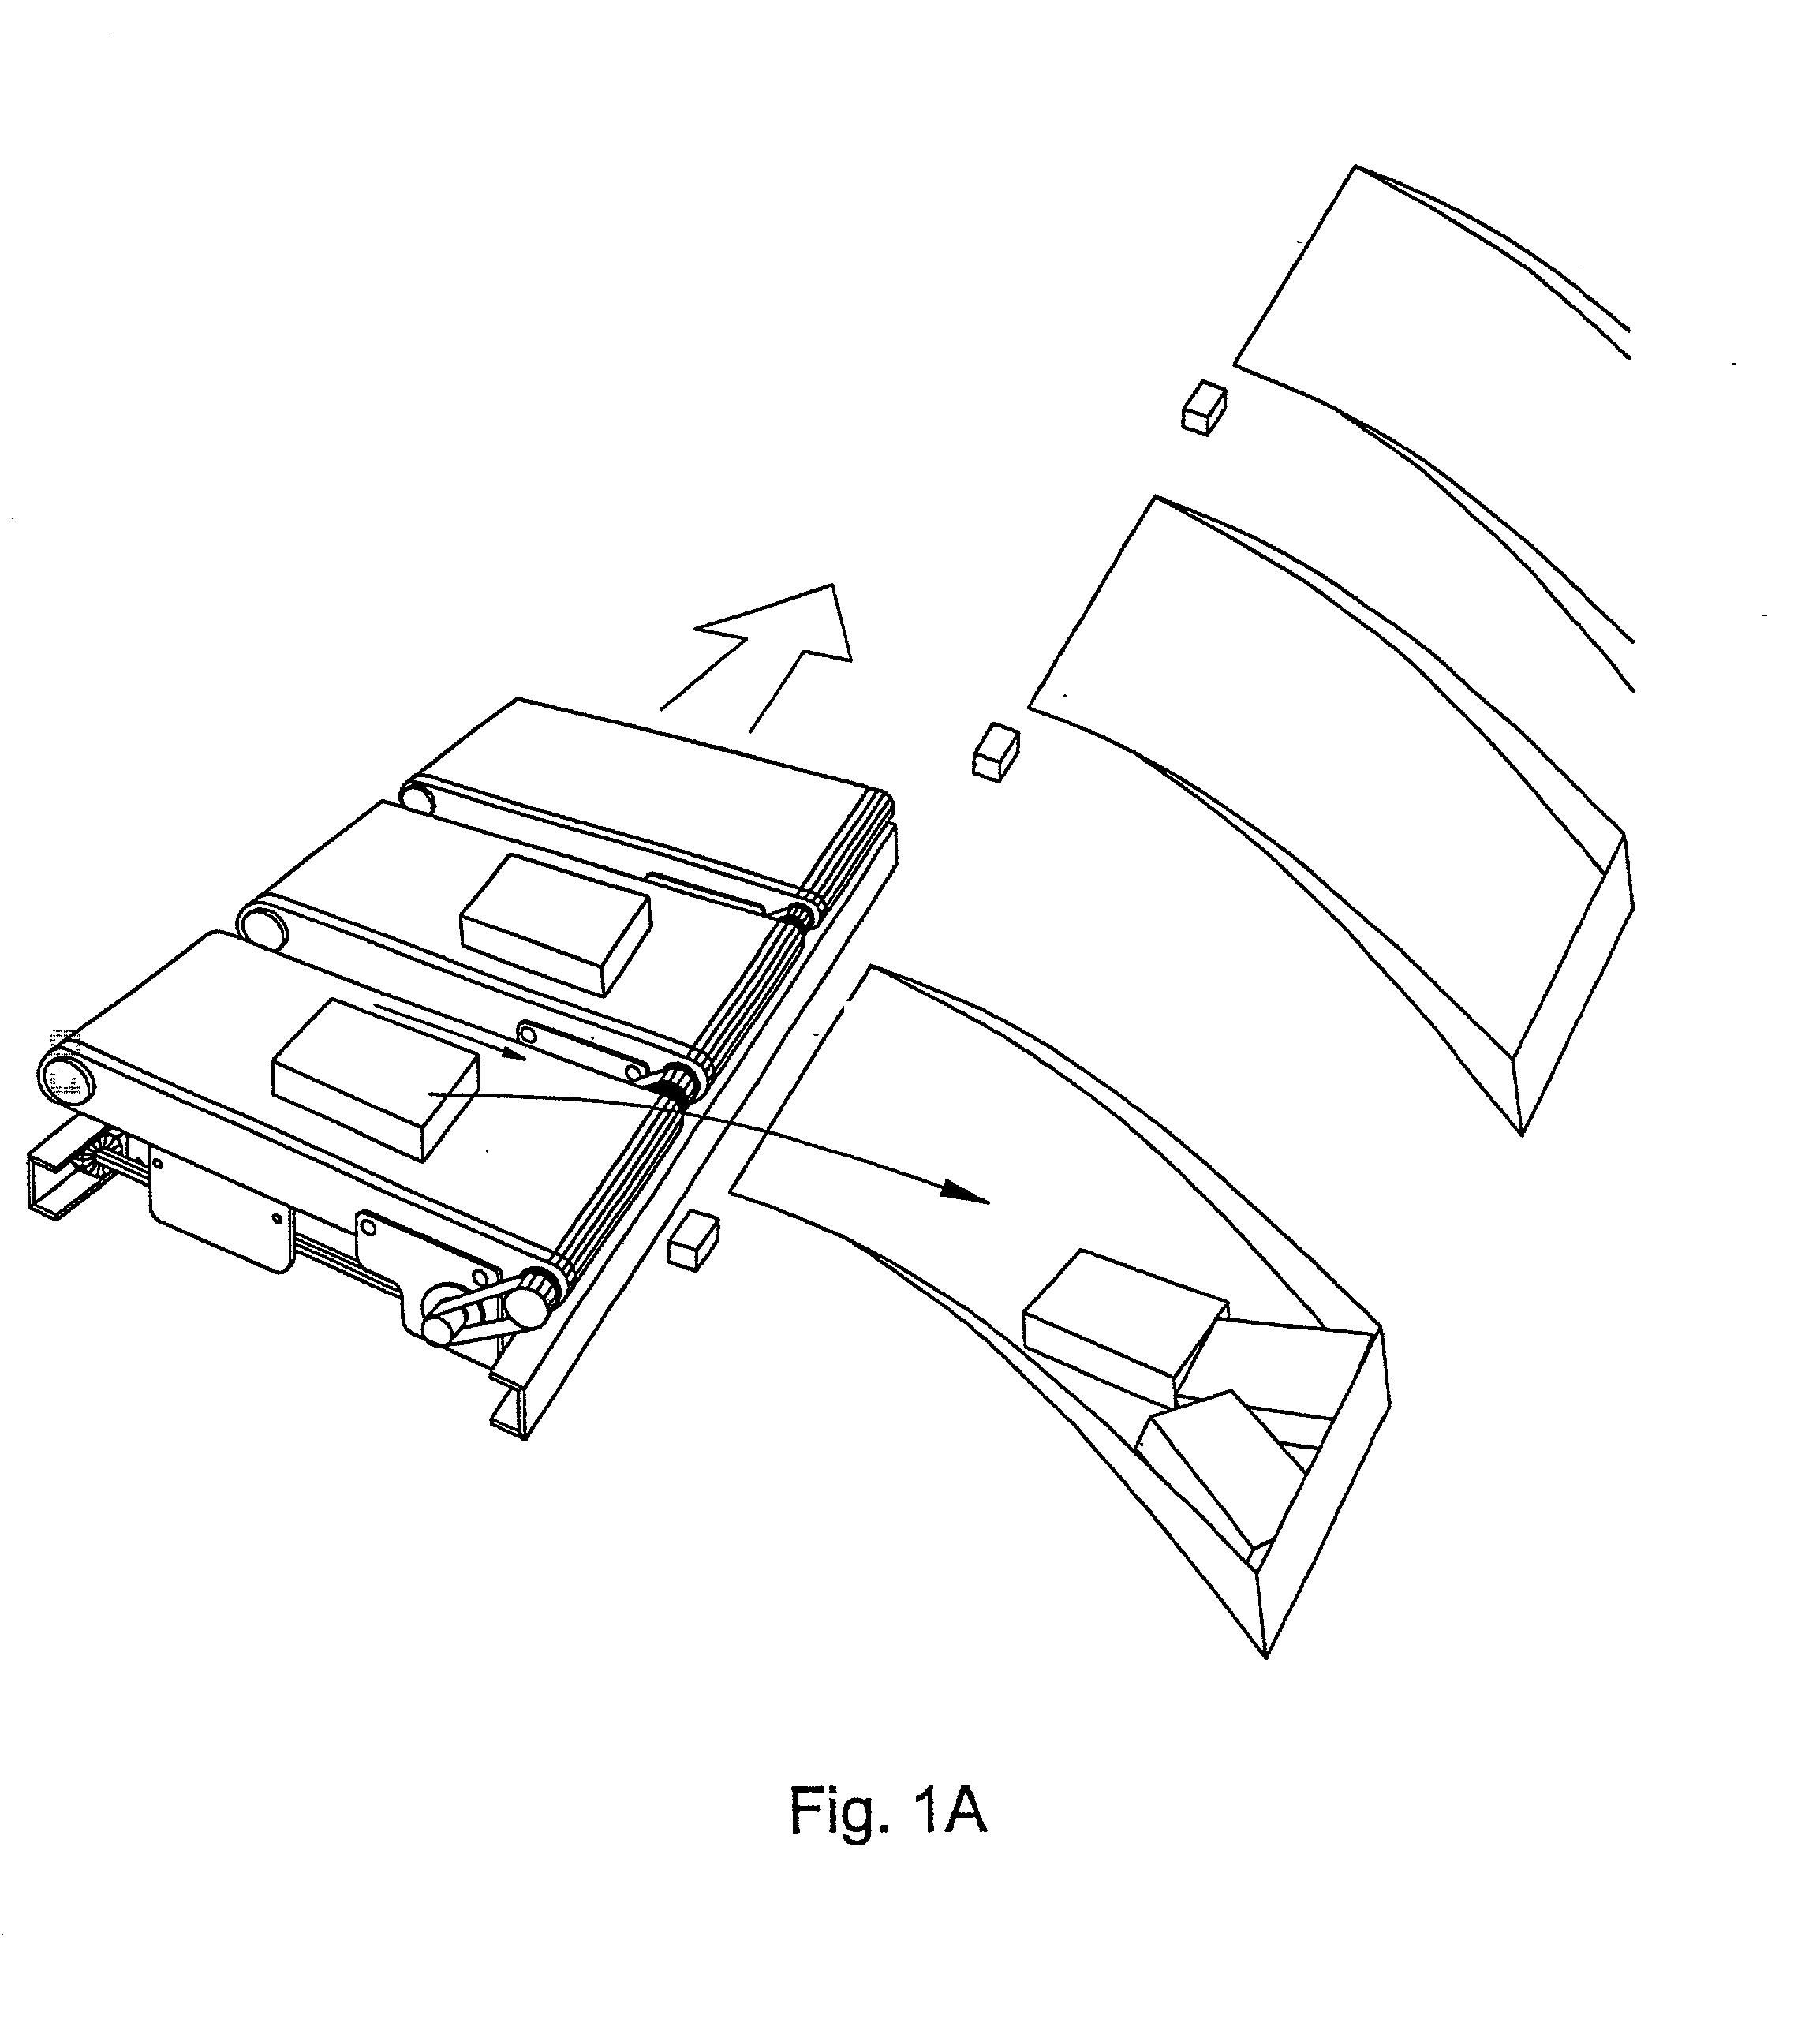 Equipment and method for activating and controlling sorting units in a sorting machine